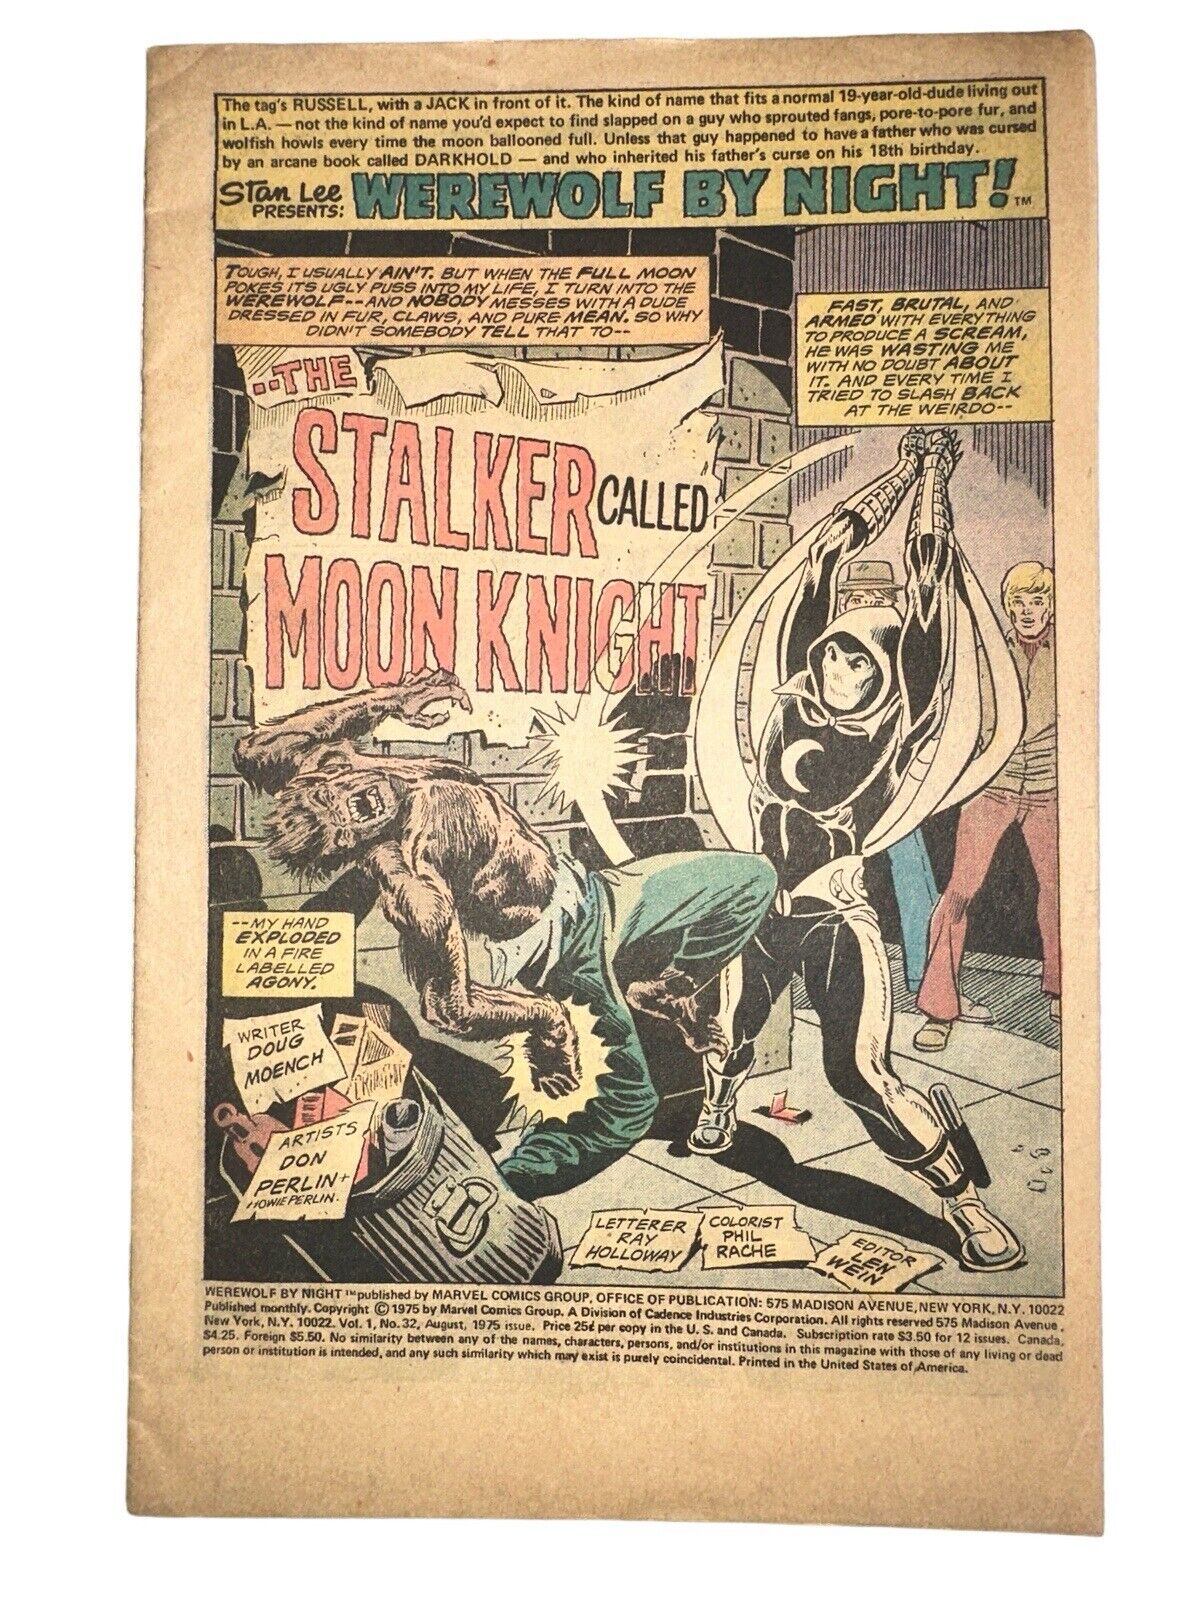 WEREWOLF BY NIGHT #32 Coverless First appearance of Moon knight *Reprint Cover*